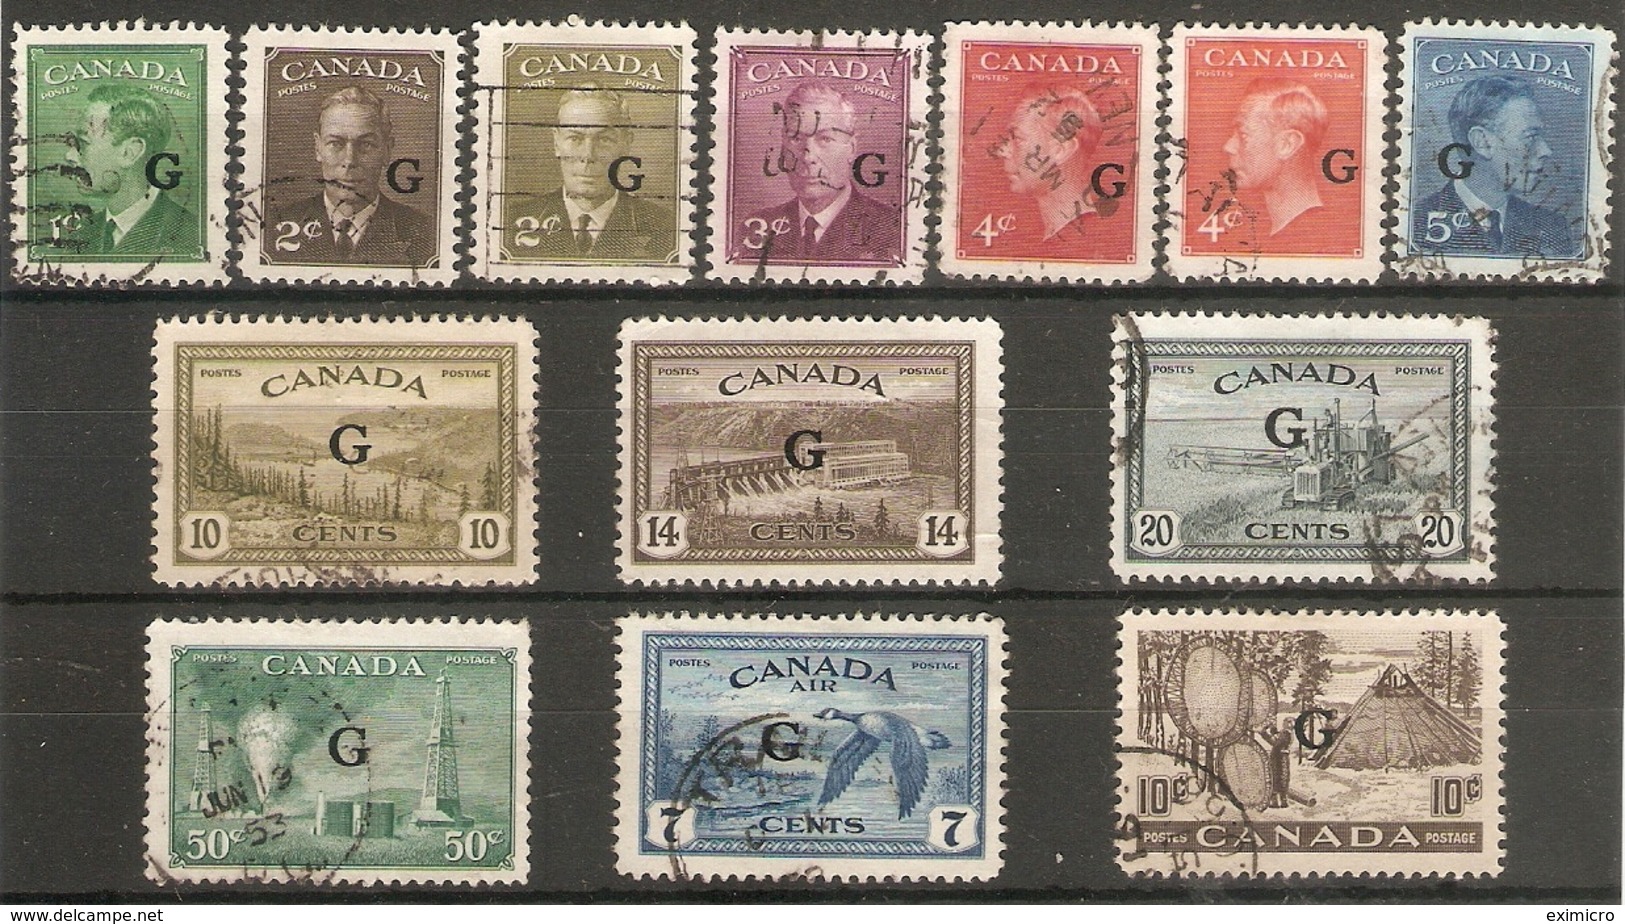 CANADA 1949  'G'. OFFICIALS BETWEEN SG O178 AND SG O191 FINE USED Cat £75+ - Sovraccarichi